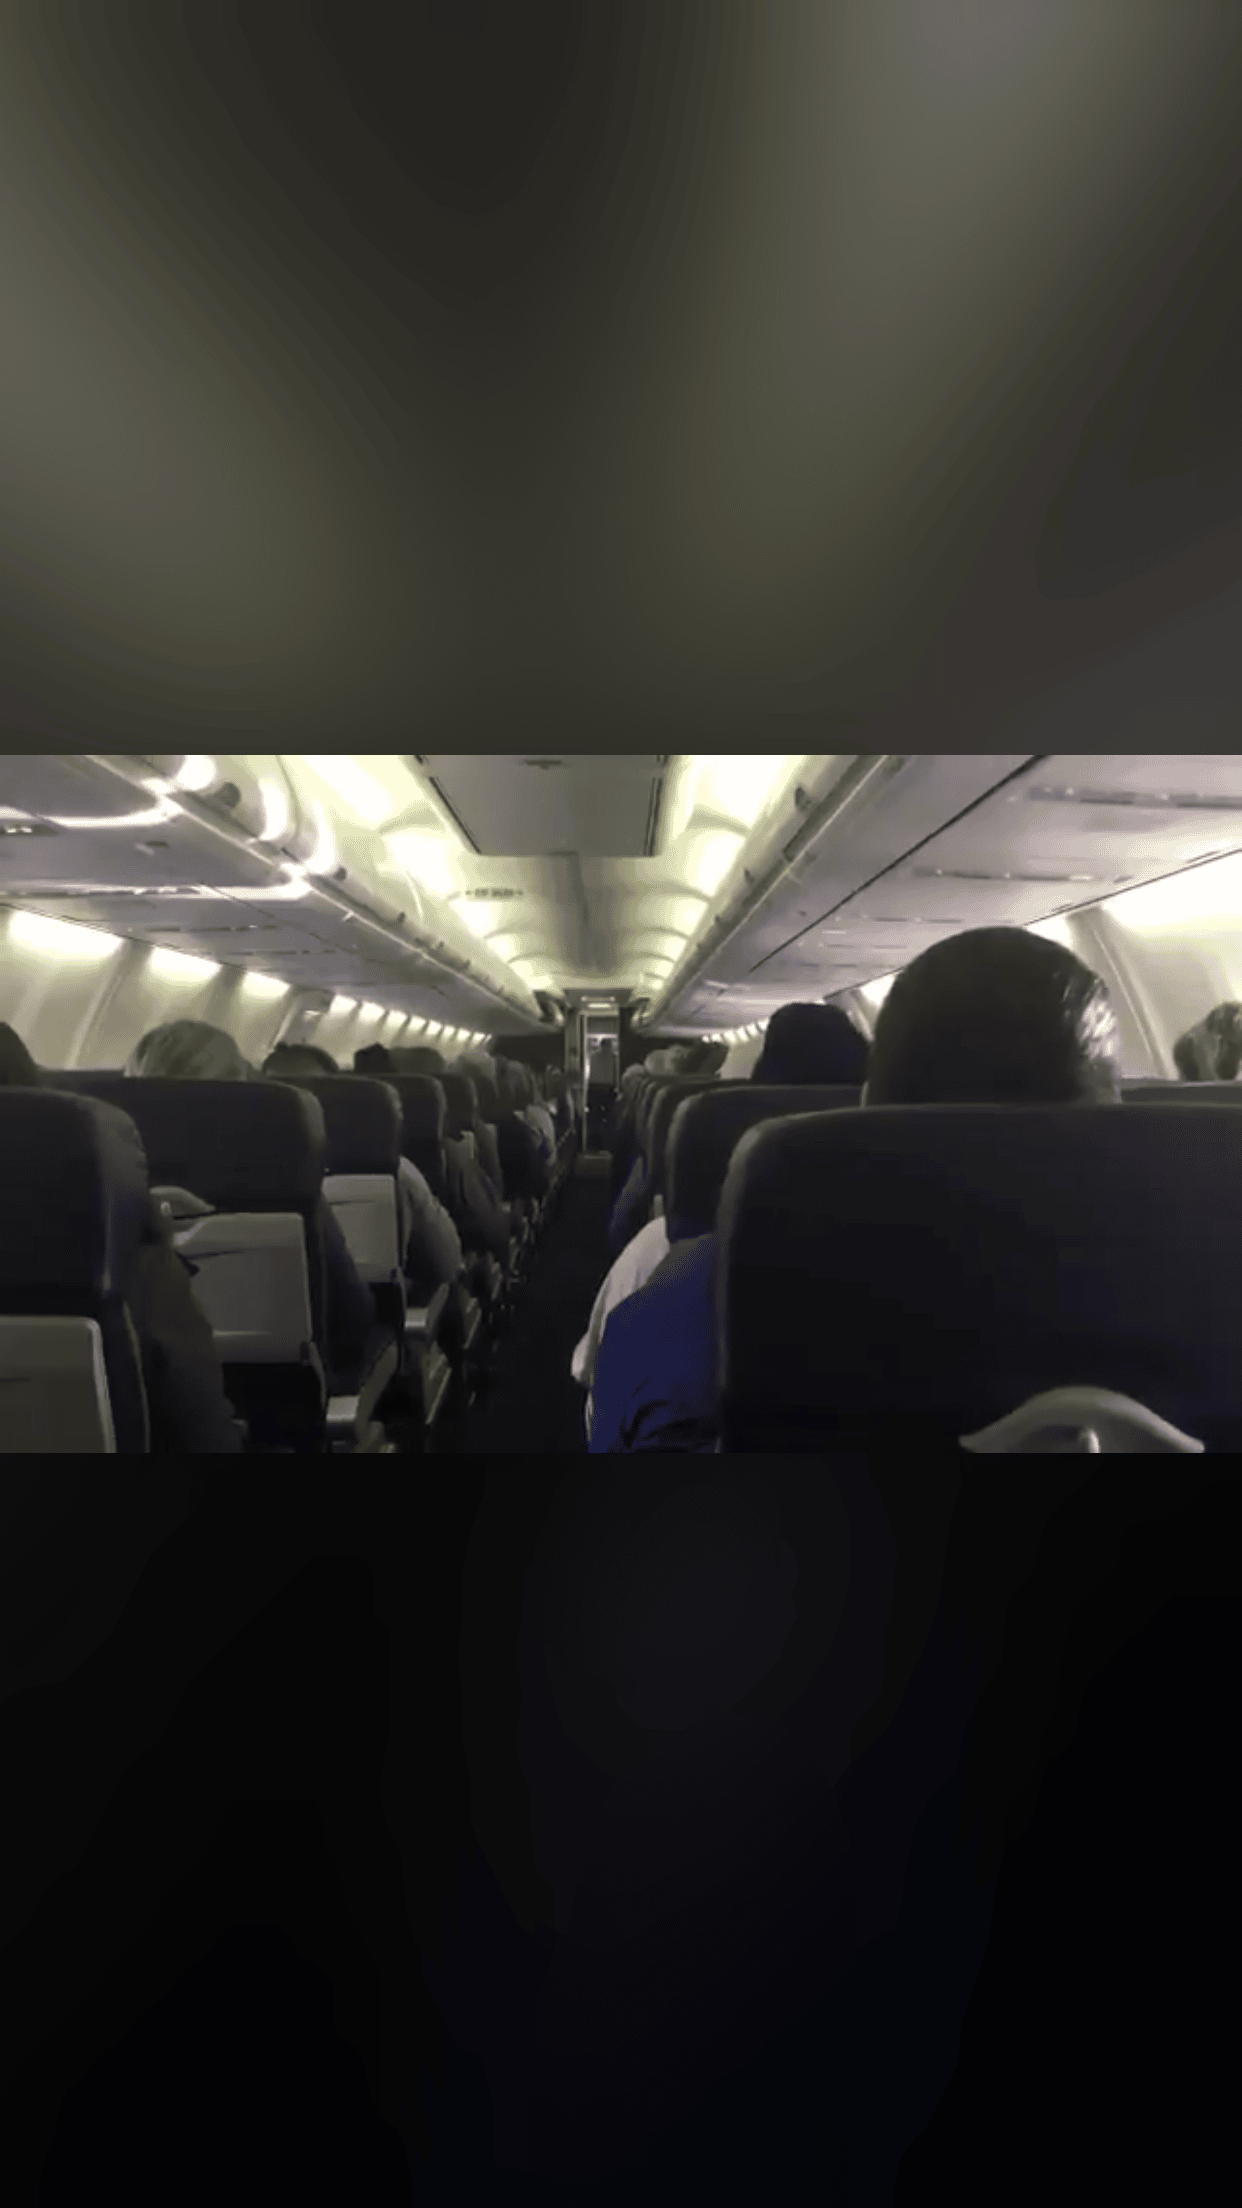 Friendly skies: Bills fans sing shout song on flight to Jacksonville – VIDEO